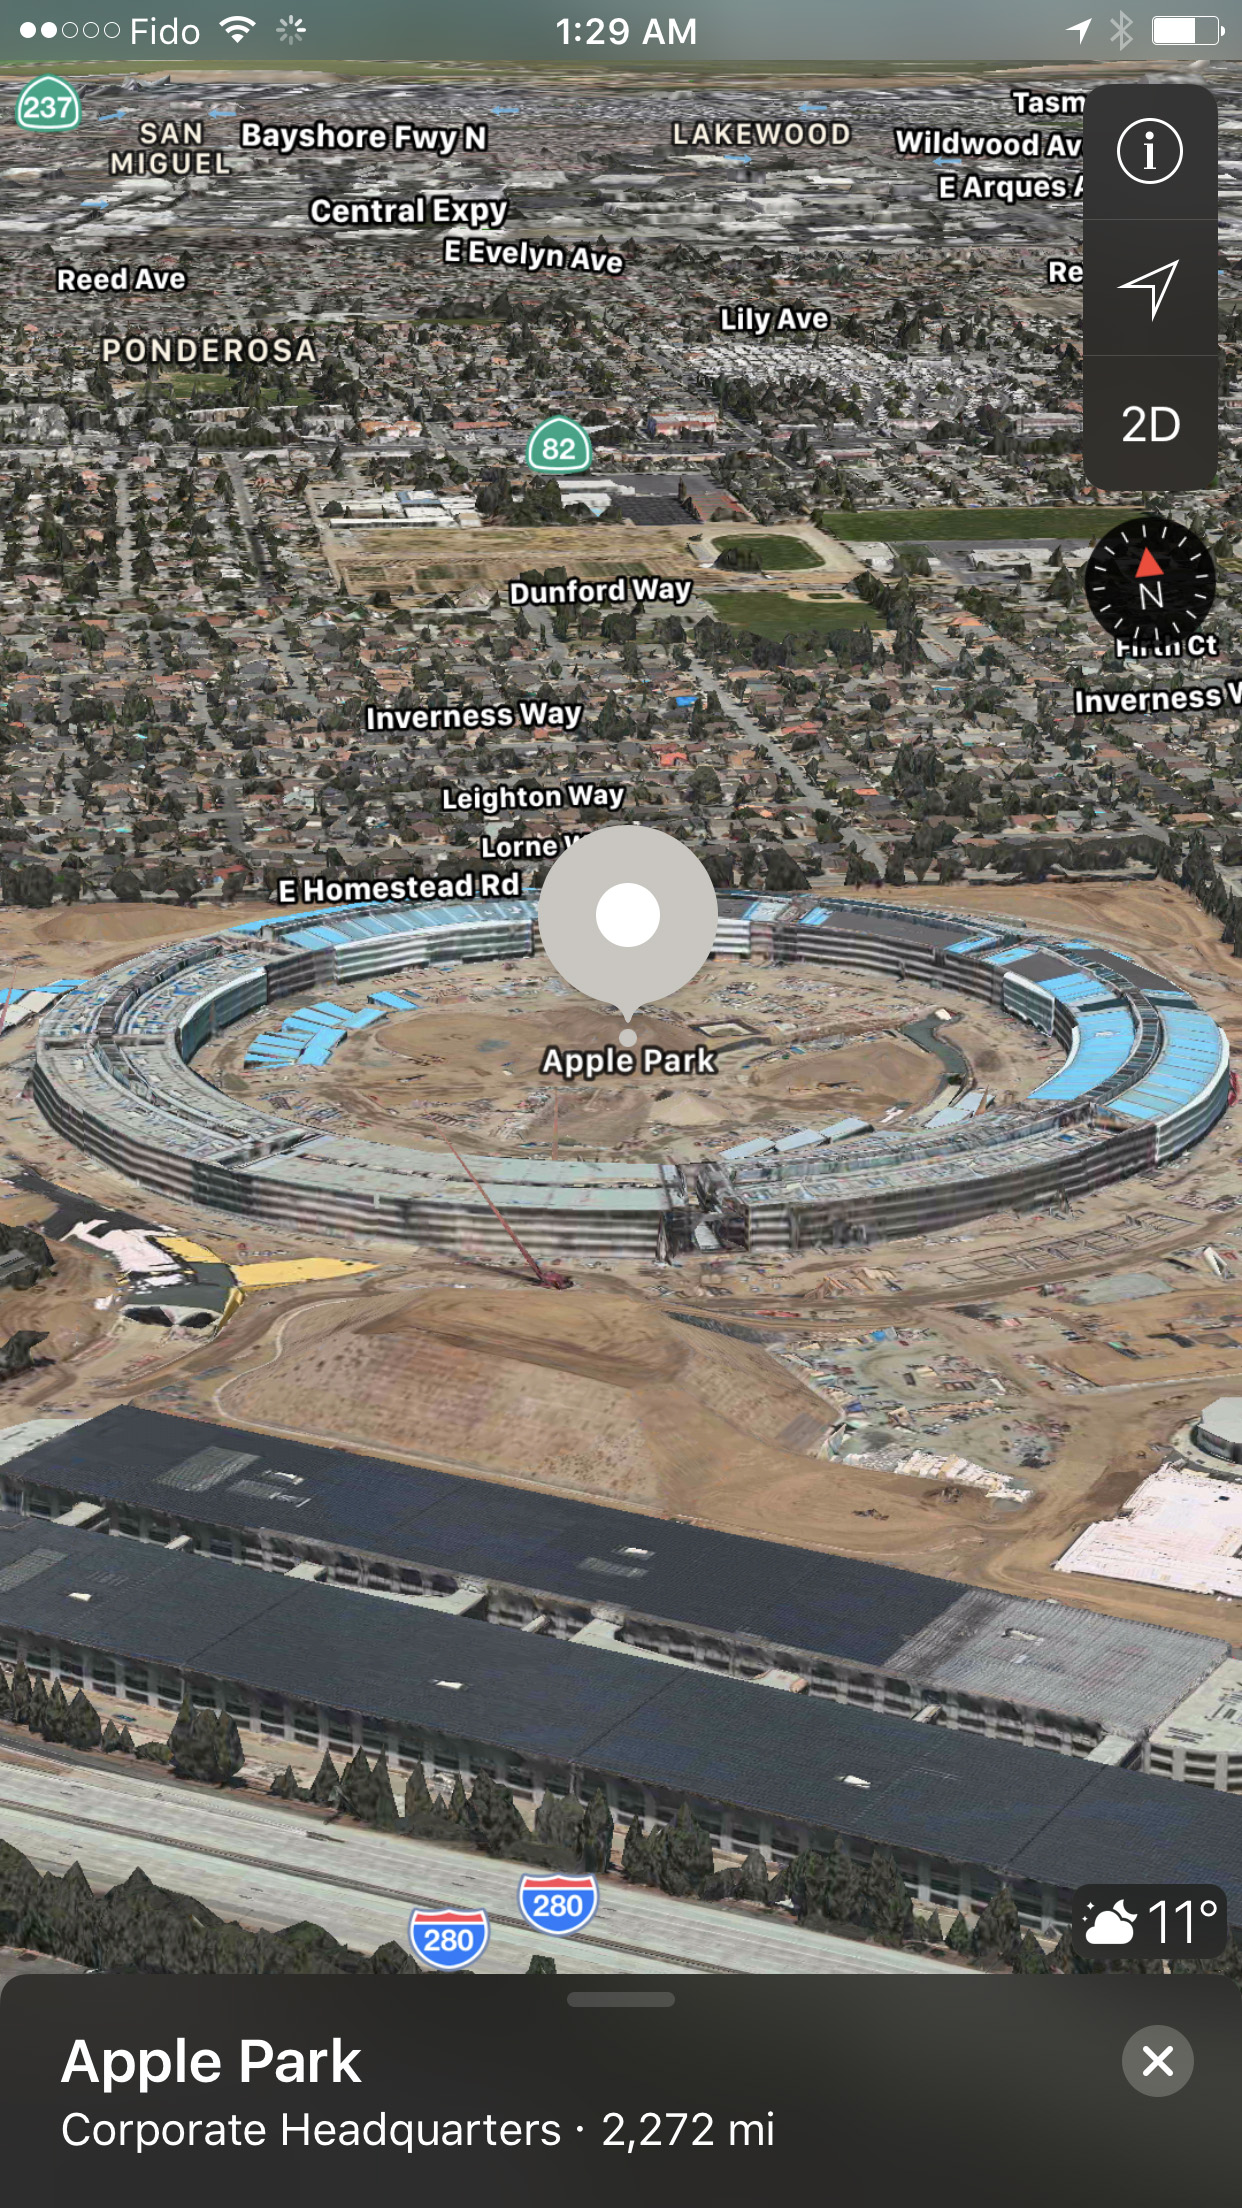 Apple Park Flyover and Data Added to Apple Maps